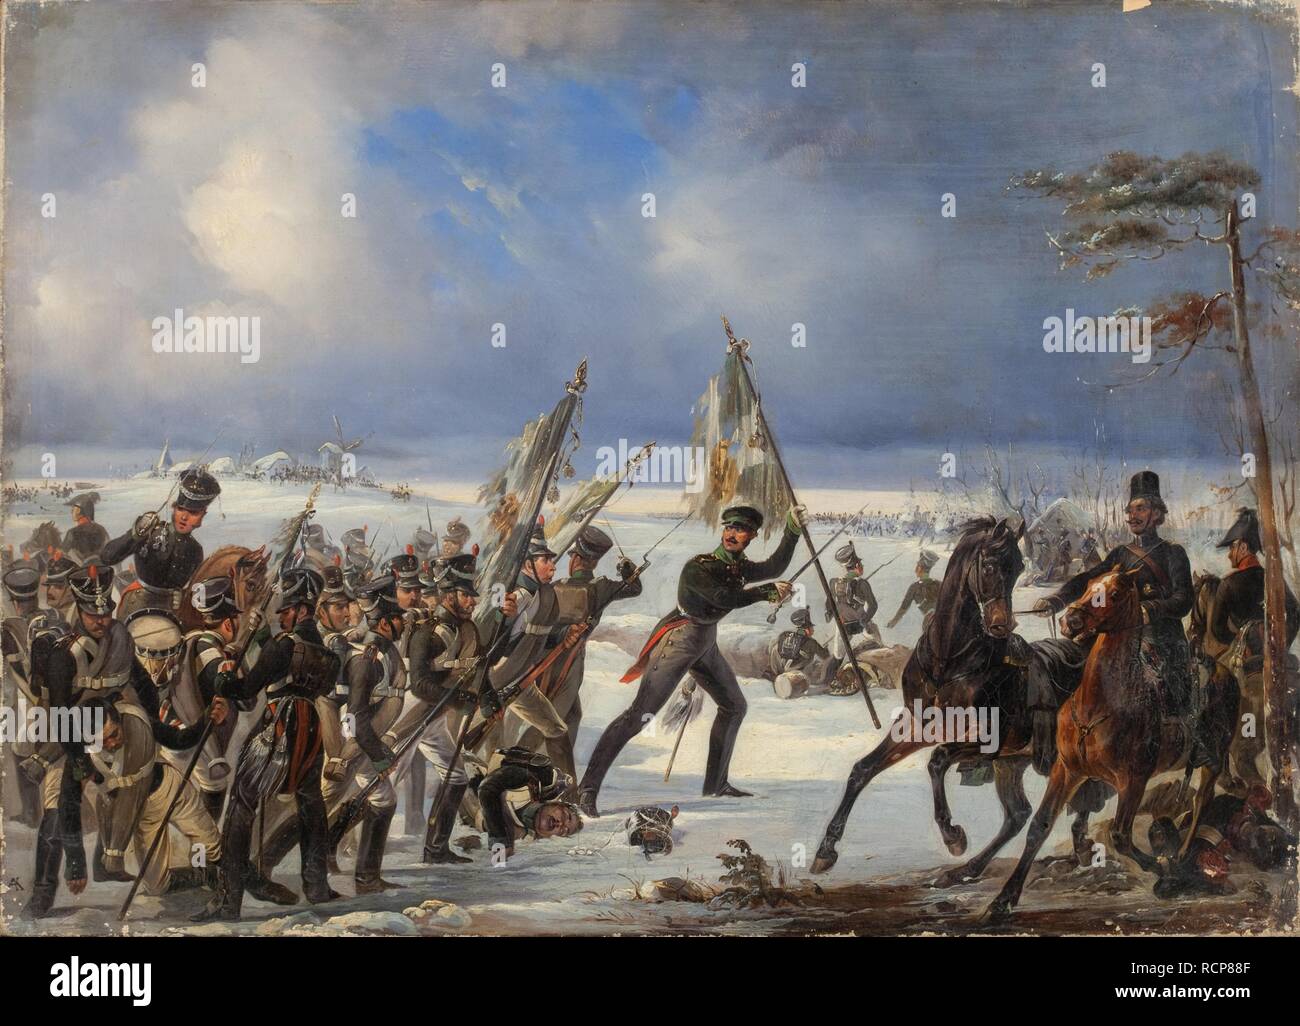 The Battle of Golymin on 26 December 1806. Museum: State History Museum, Moscow. Author: KOTZEBUE, ALEXANDER VON. Stock Photo